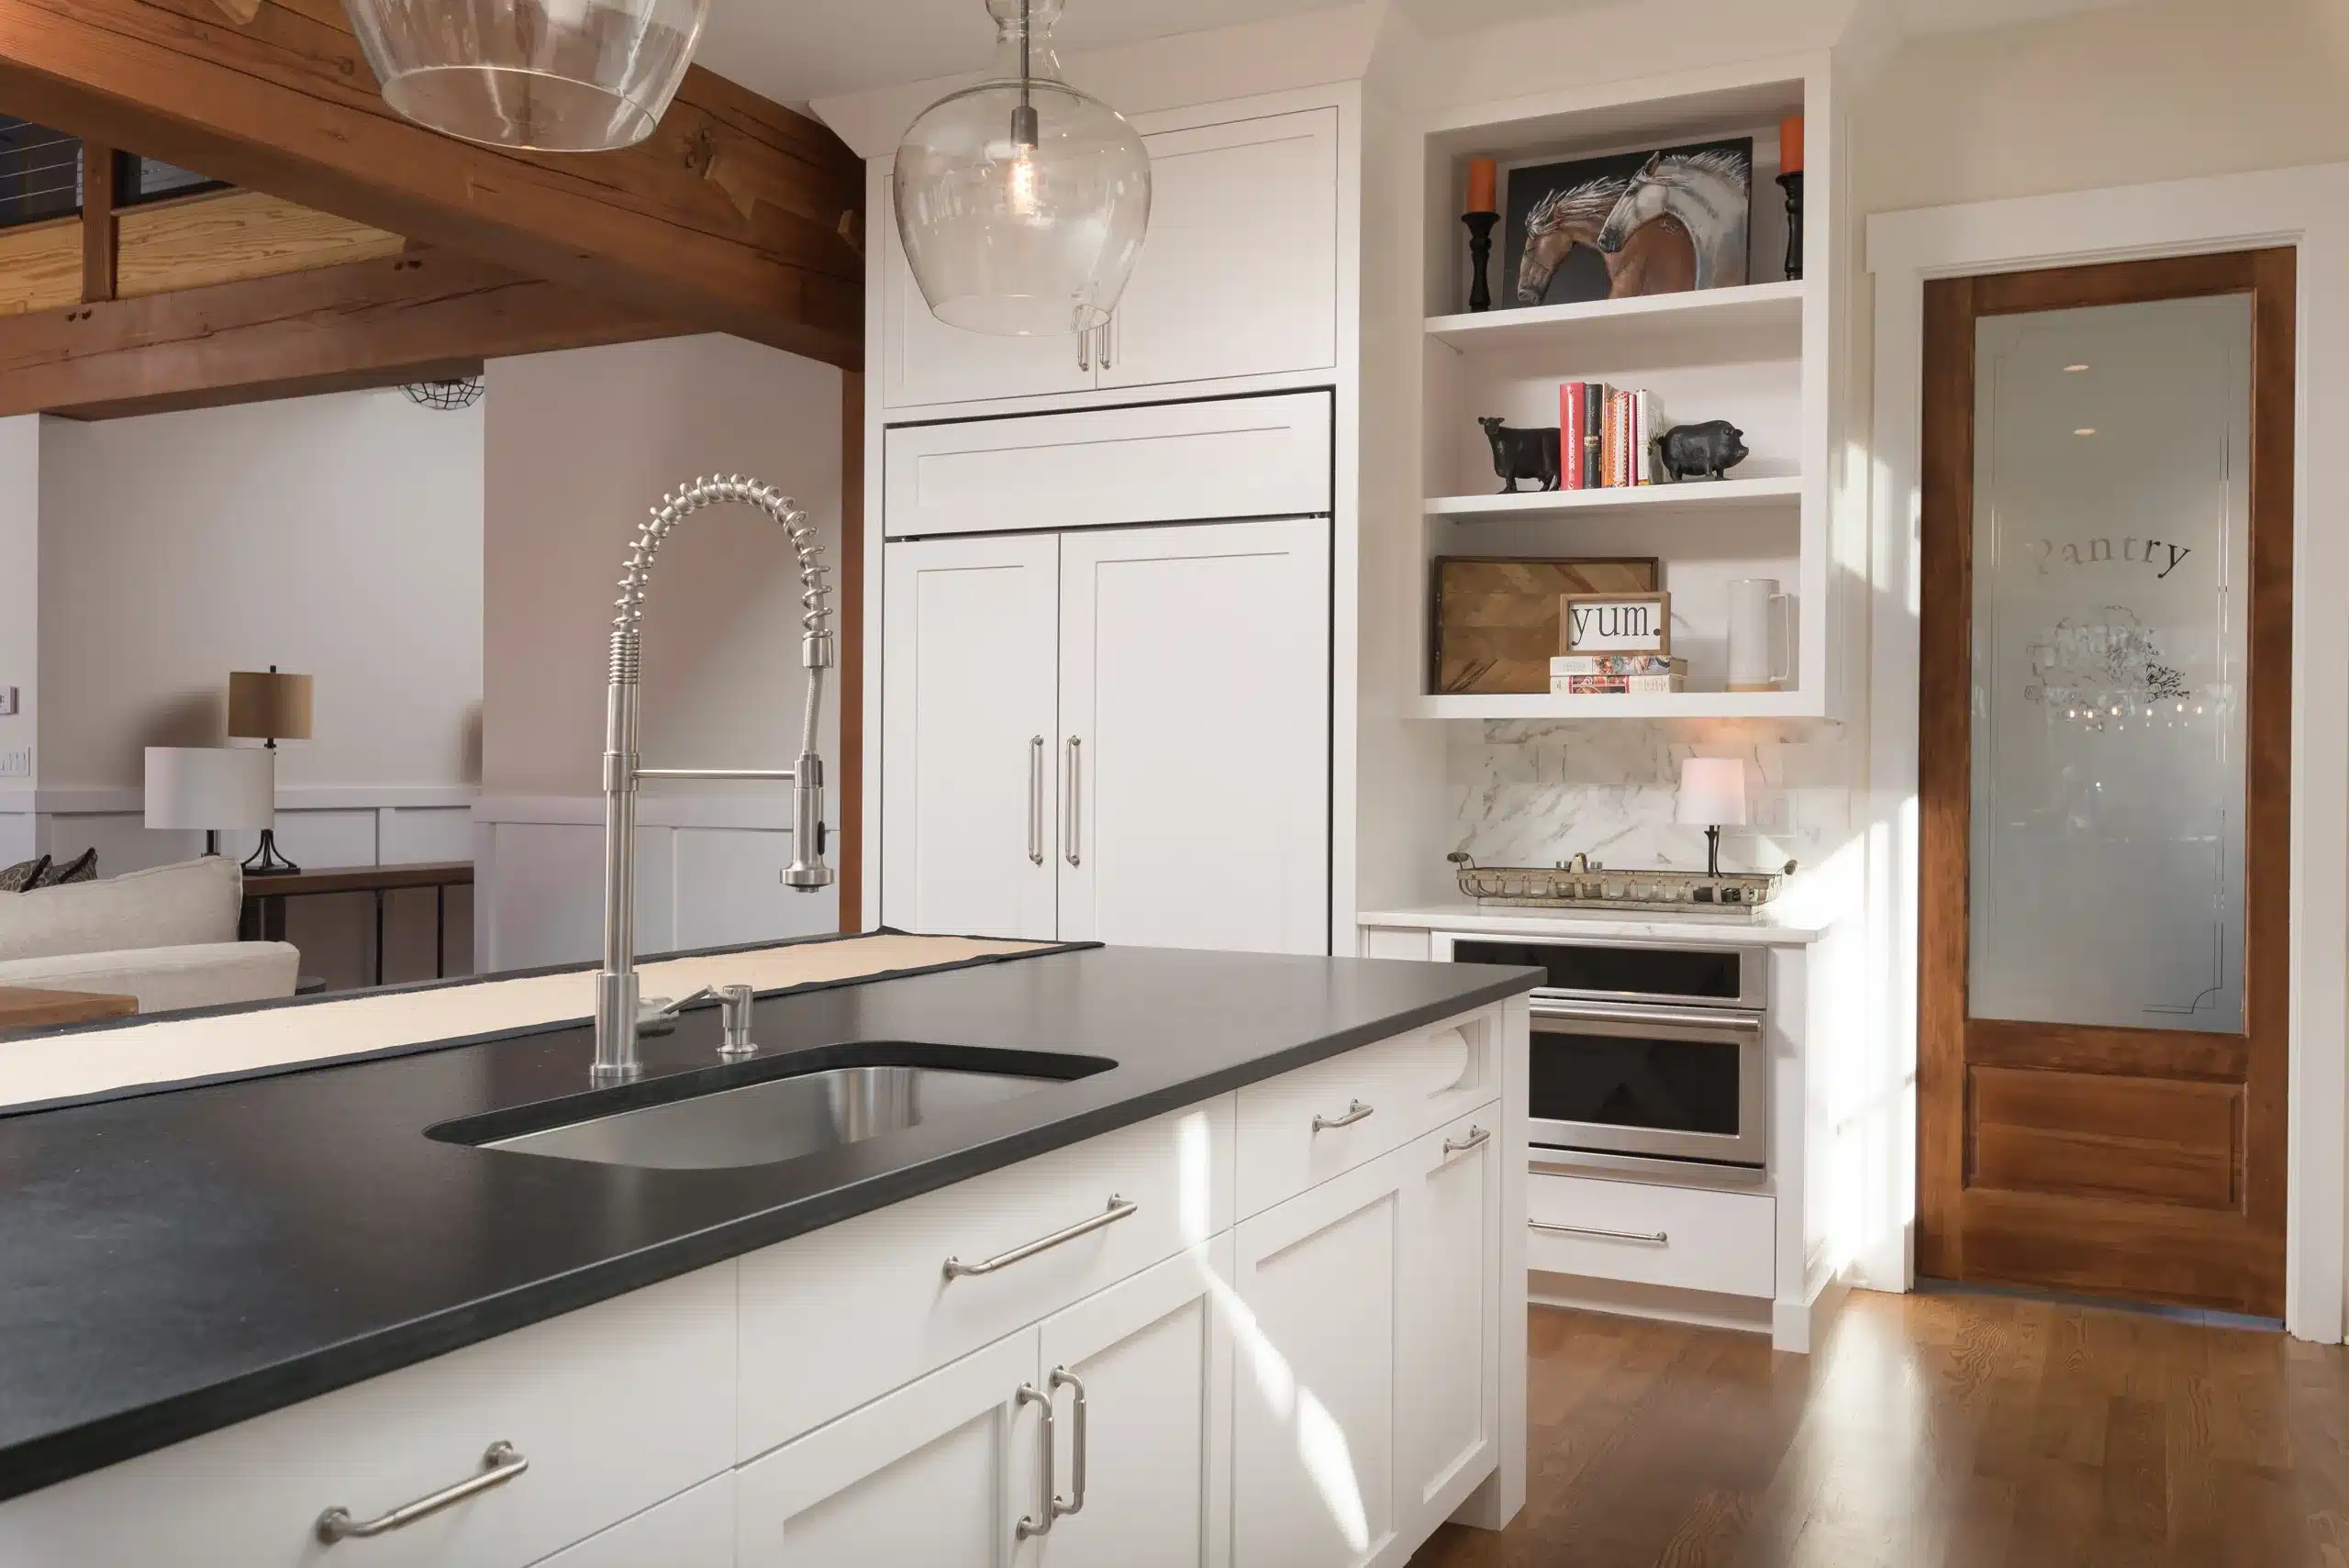 Custom kitchen cabinets from William's Handcrafted